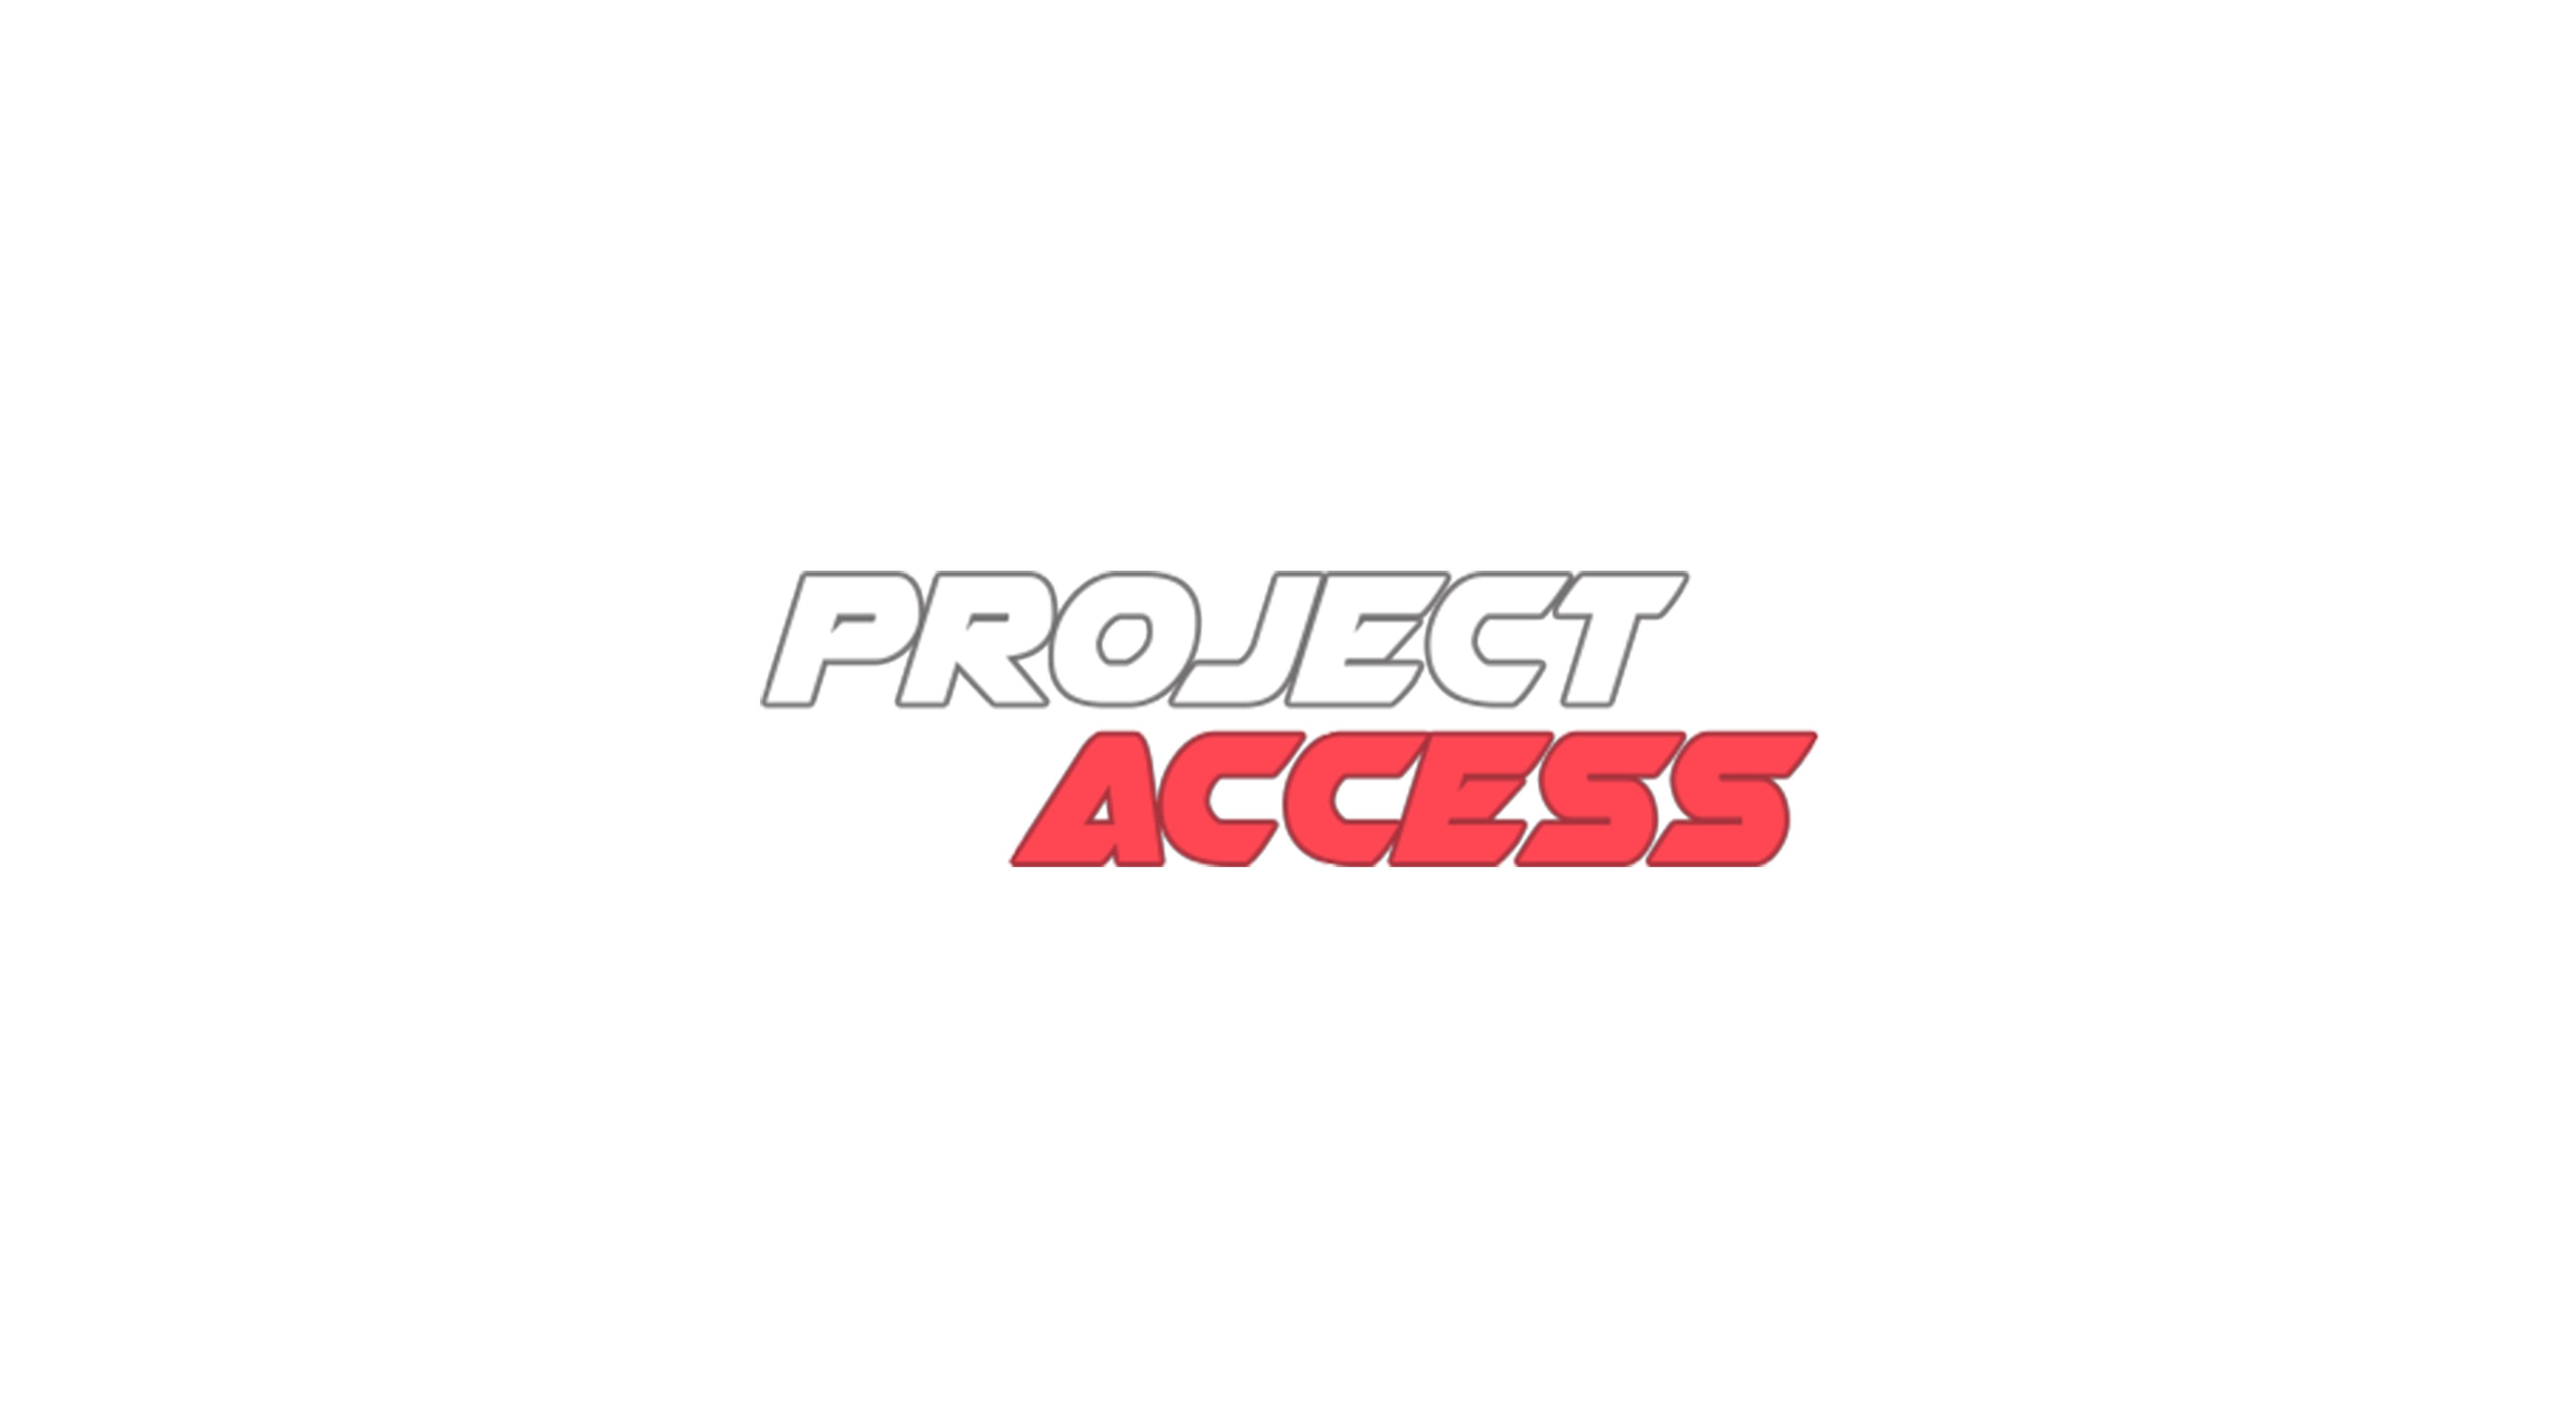 Project Access